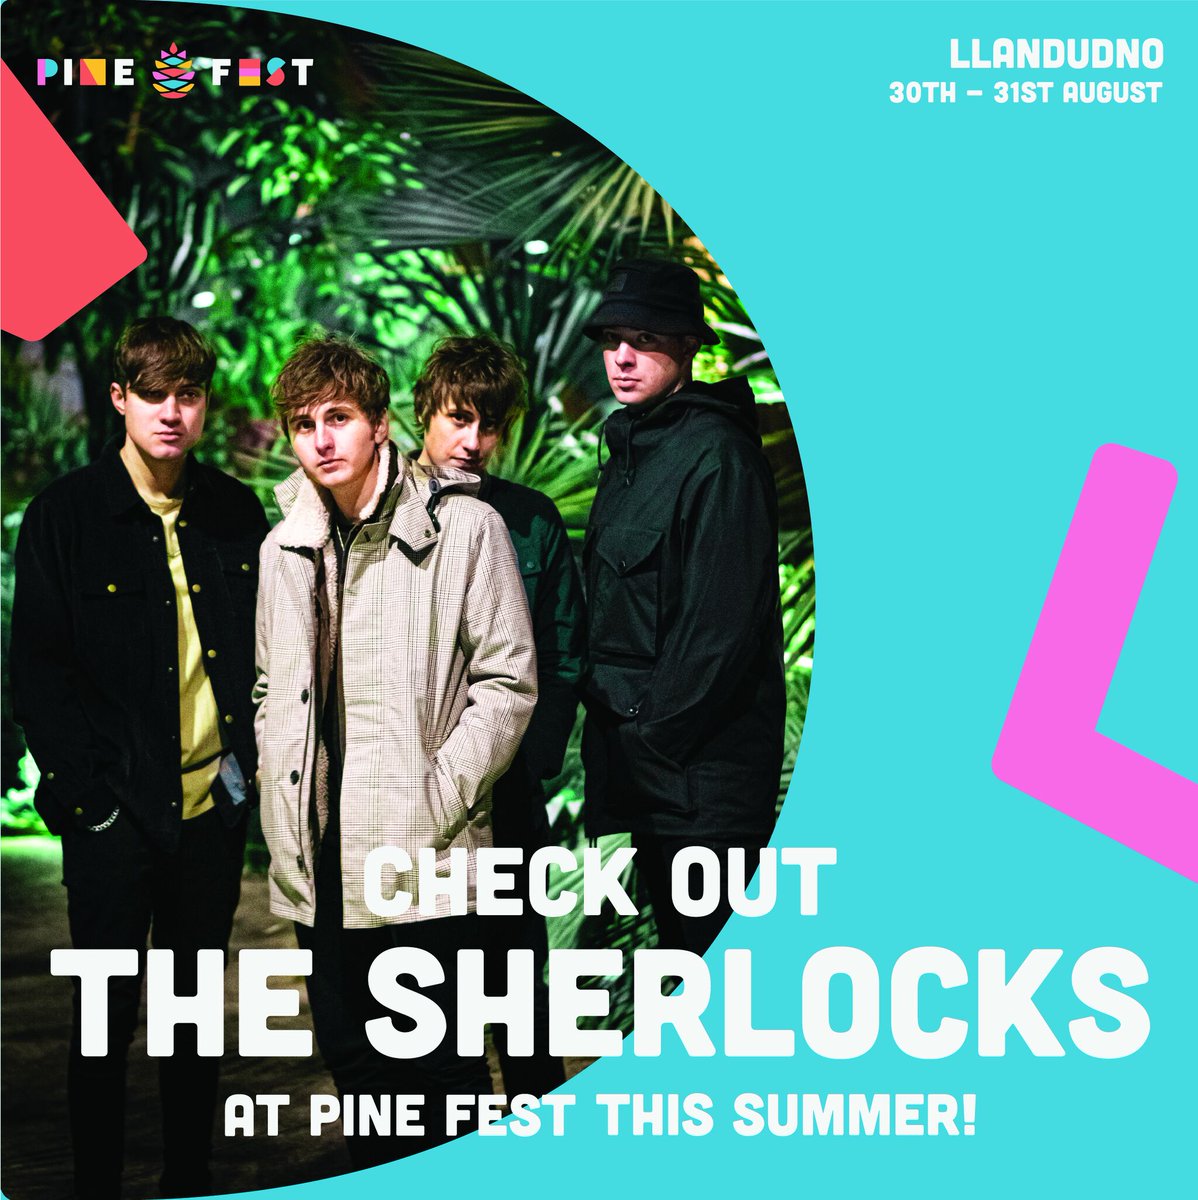 Did you know @thesherlocks will be joining us on the main stage? The Yorkshire lads have gained a loyal following over the years, now selling out tours across UK & Europe and achieving chart success with FOUR Top 20 albums! Tickets available here bit.ly/3wmtilD